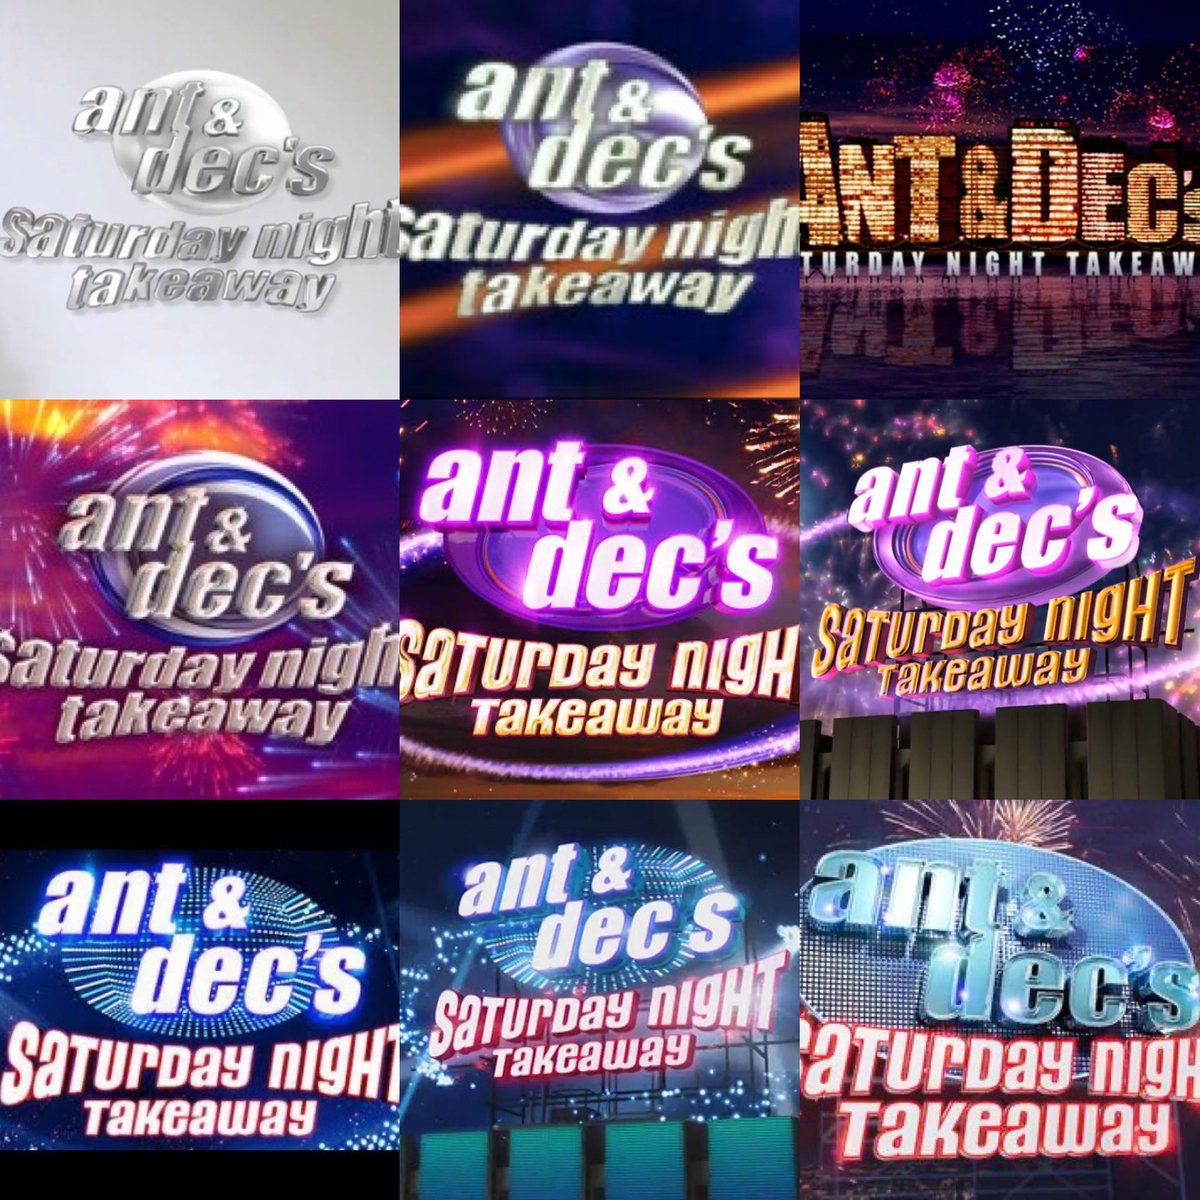 It's all over & what an absolute blast!!This has been Ant & Dec's Saturday Night Takeaway!!! 20 series over 22 years from 2002-2024. What a wild ride it has been. #SaturdayNightTakeaway